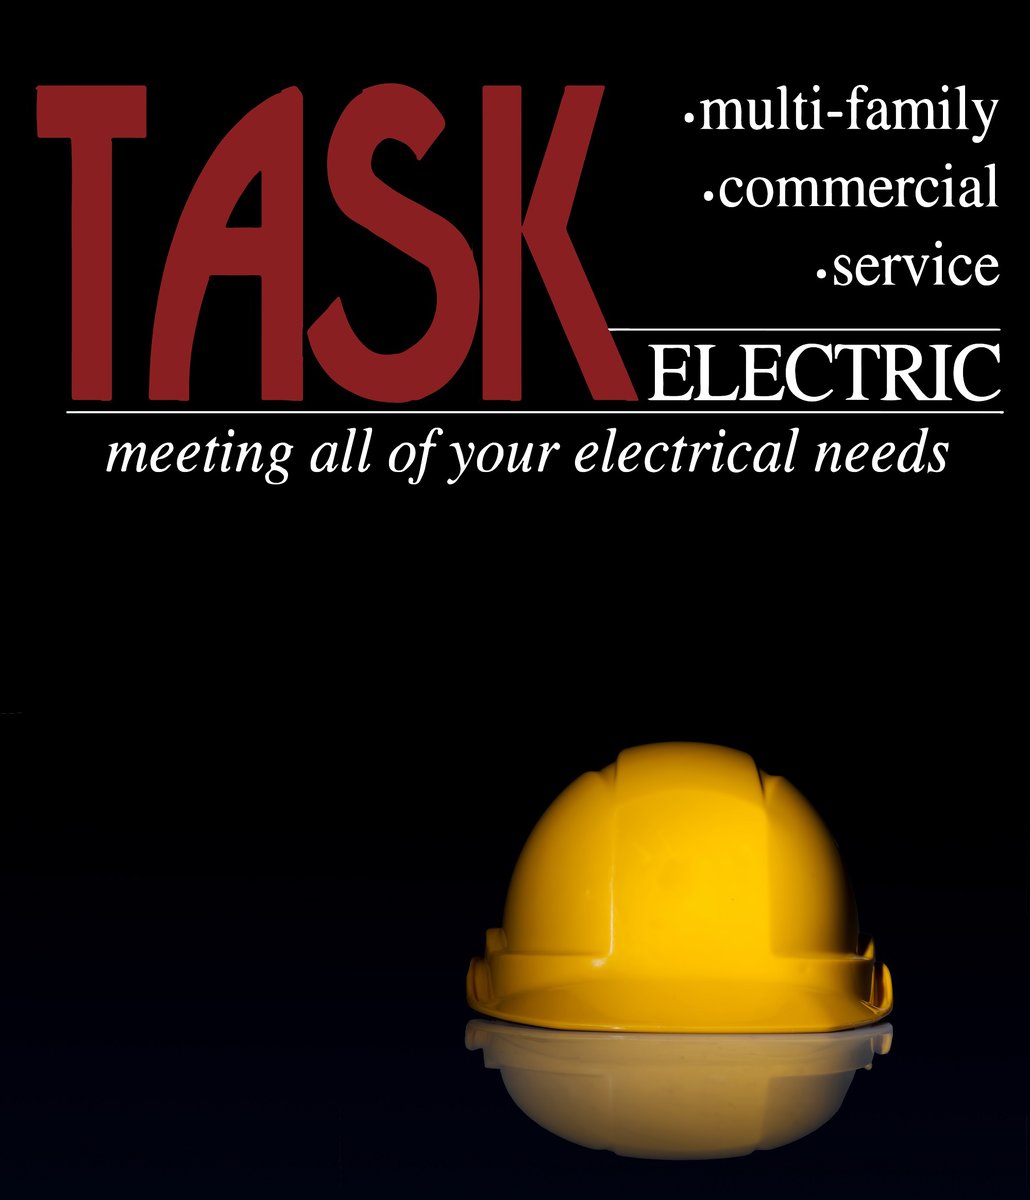 We'd love to be a part of your next multi-family or commercial project? Contact Task Electric today for a bid.

taskelectricllc.com

#electricians #electricalcontractors #contractors #raleigh #raleighnc #northcarolina #taskeelectricllc